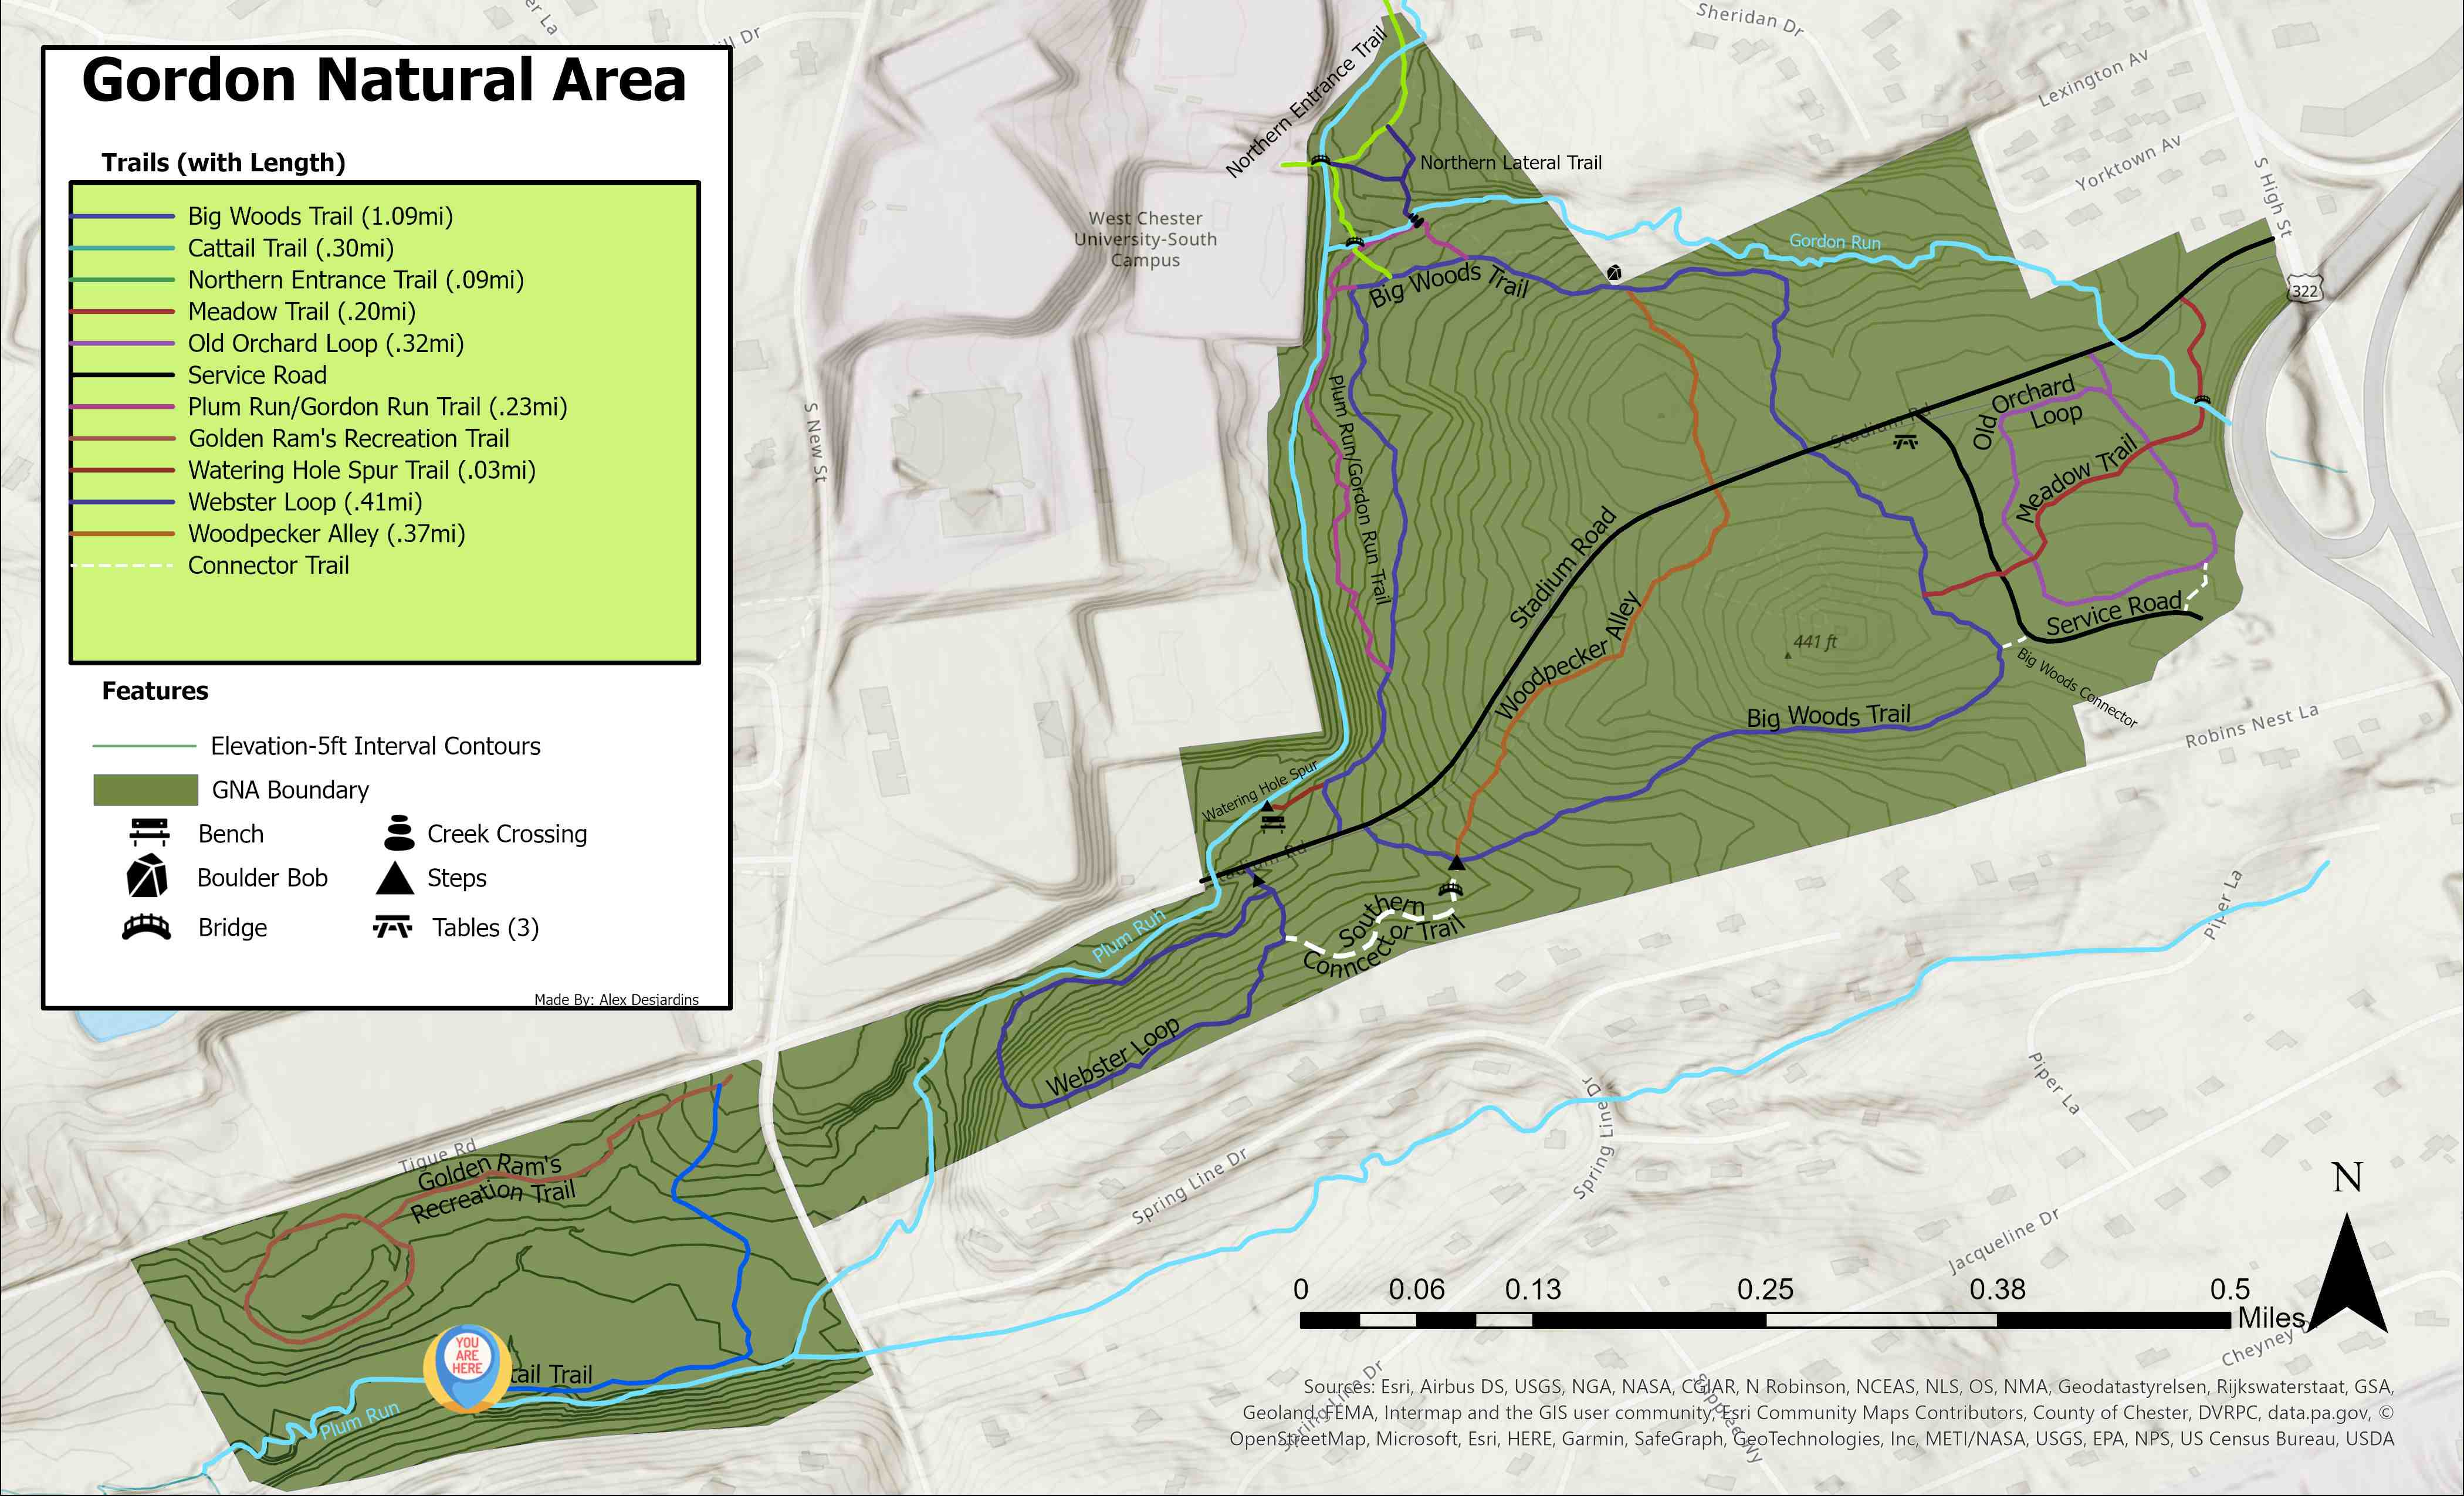 Map of the Gordon Natural Area trail system showing your current location